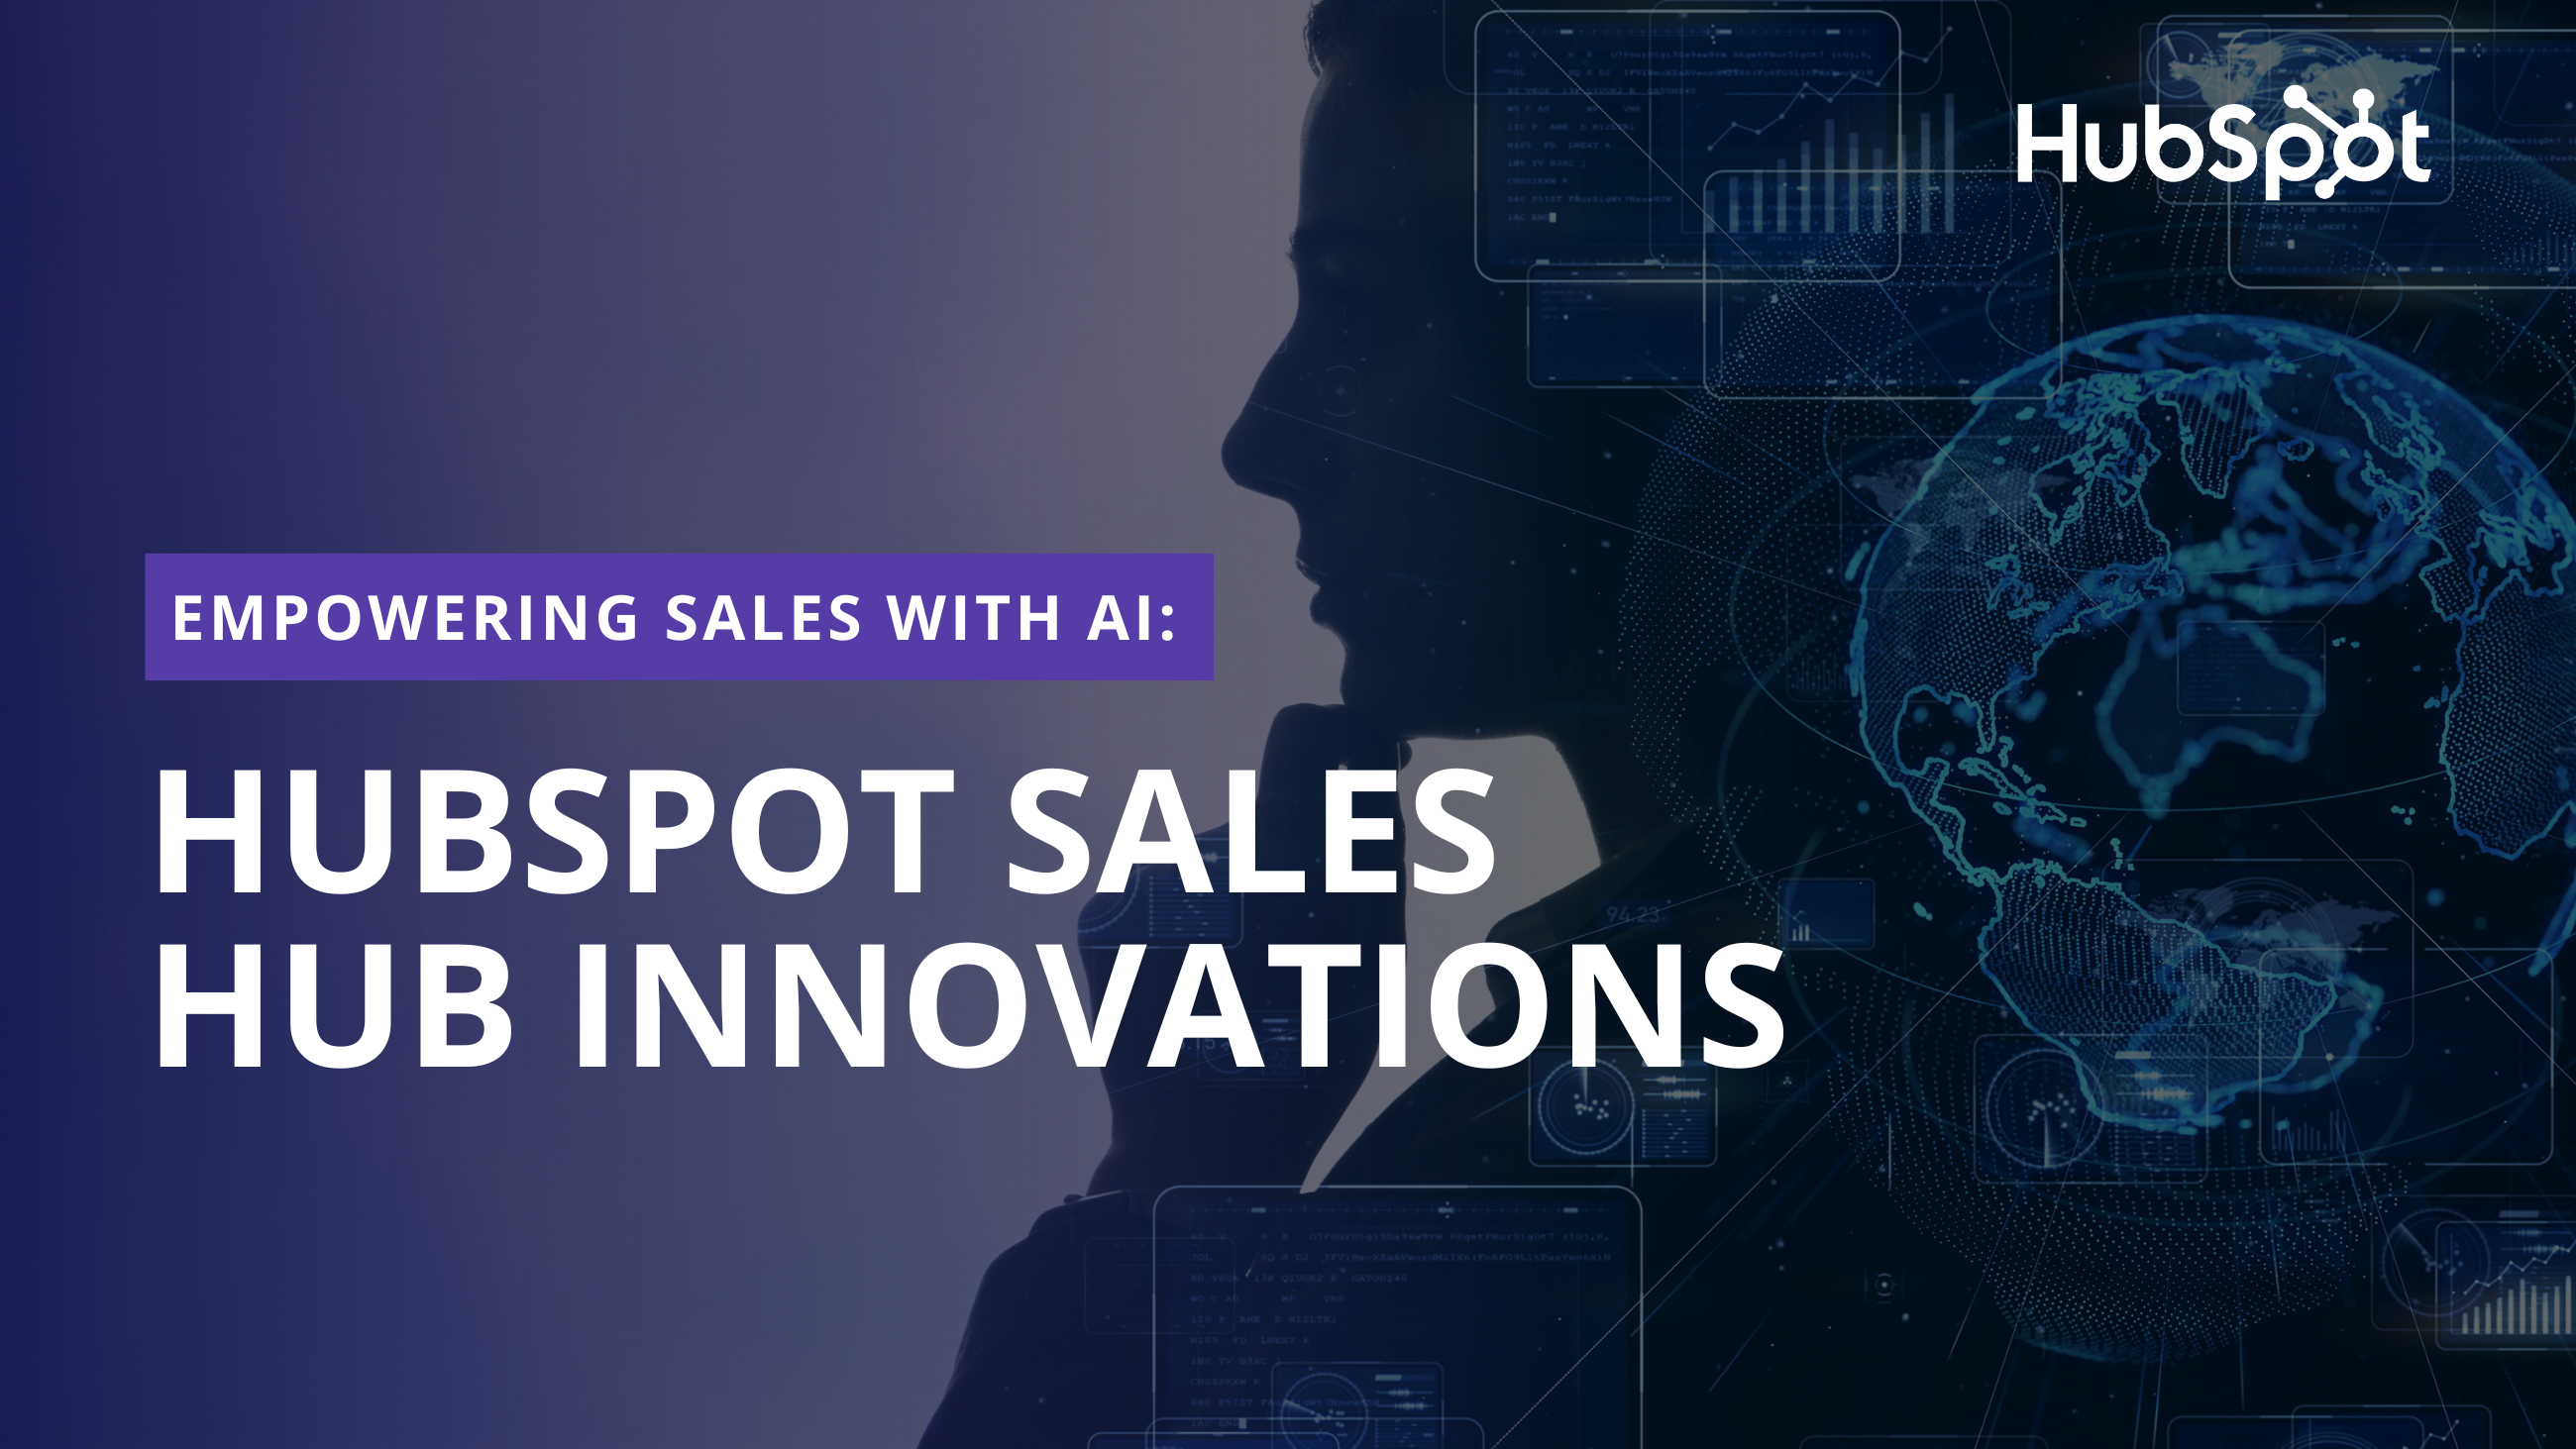 Empowering Sales with AI: HubSpot Sales Hub Innovations